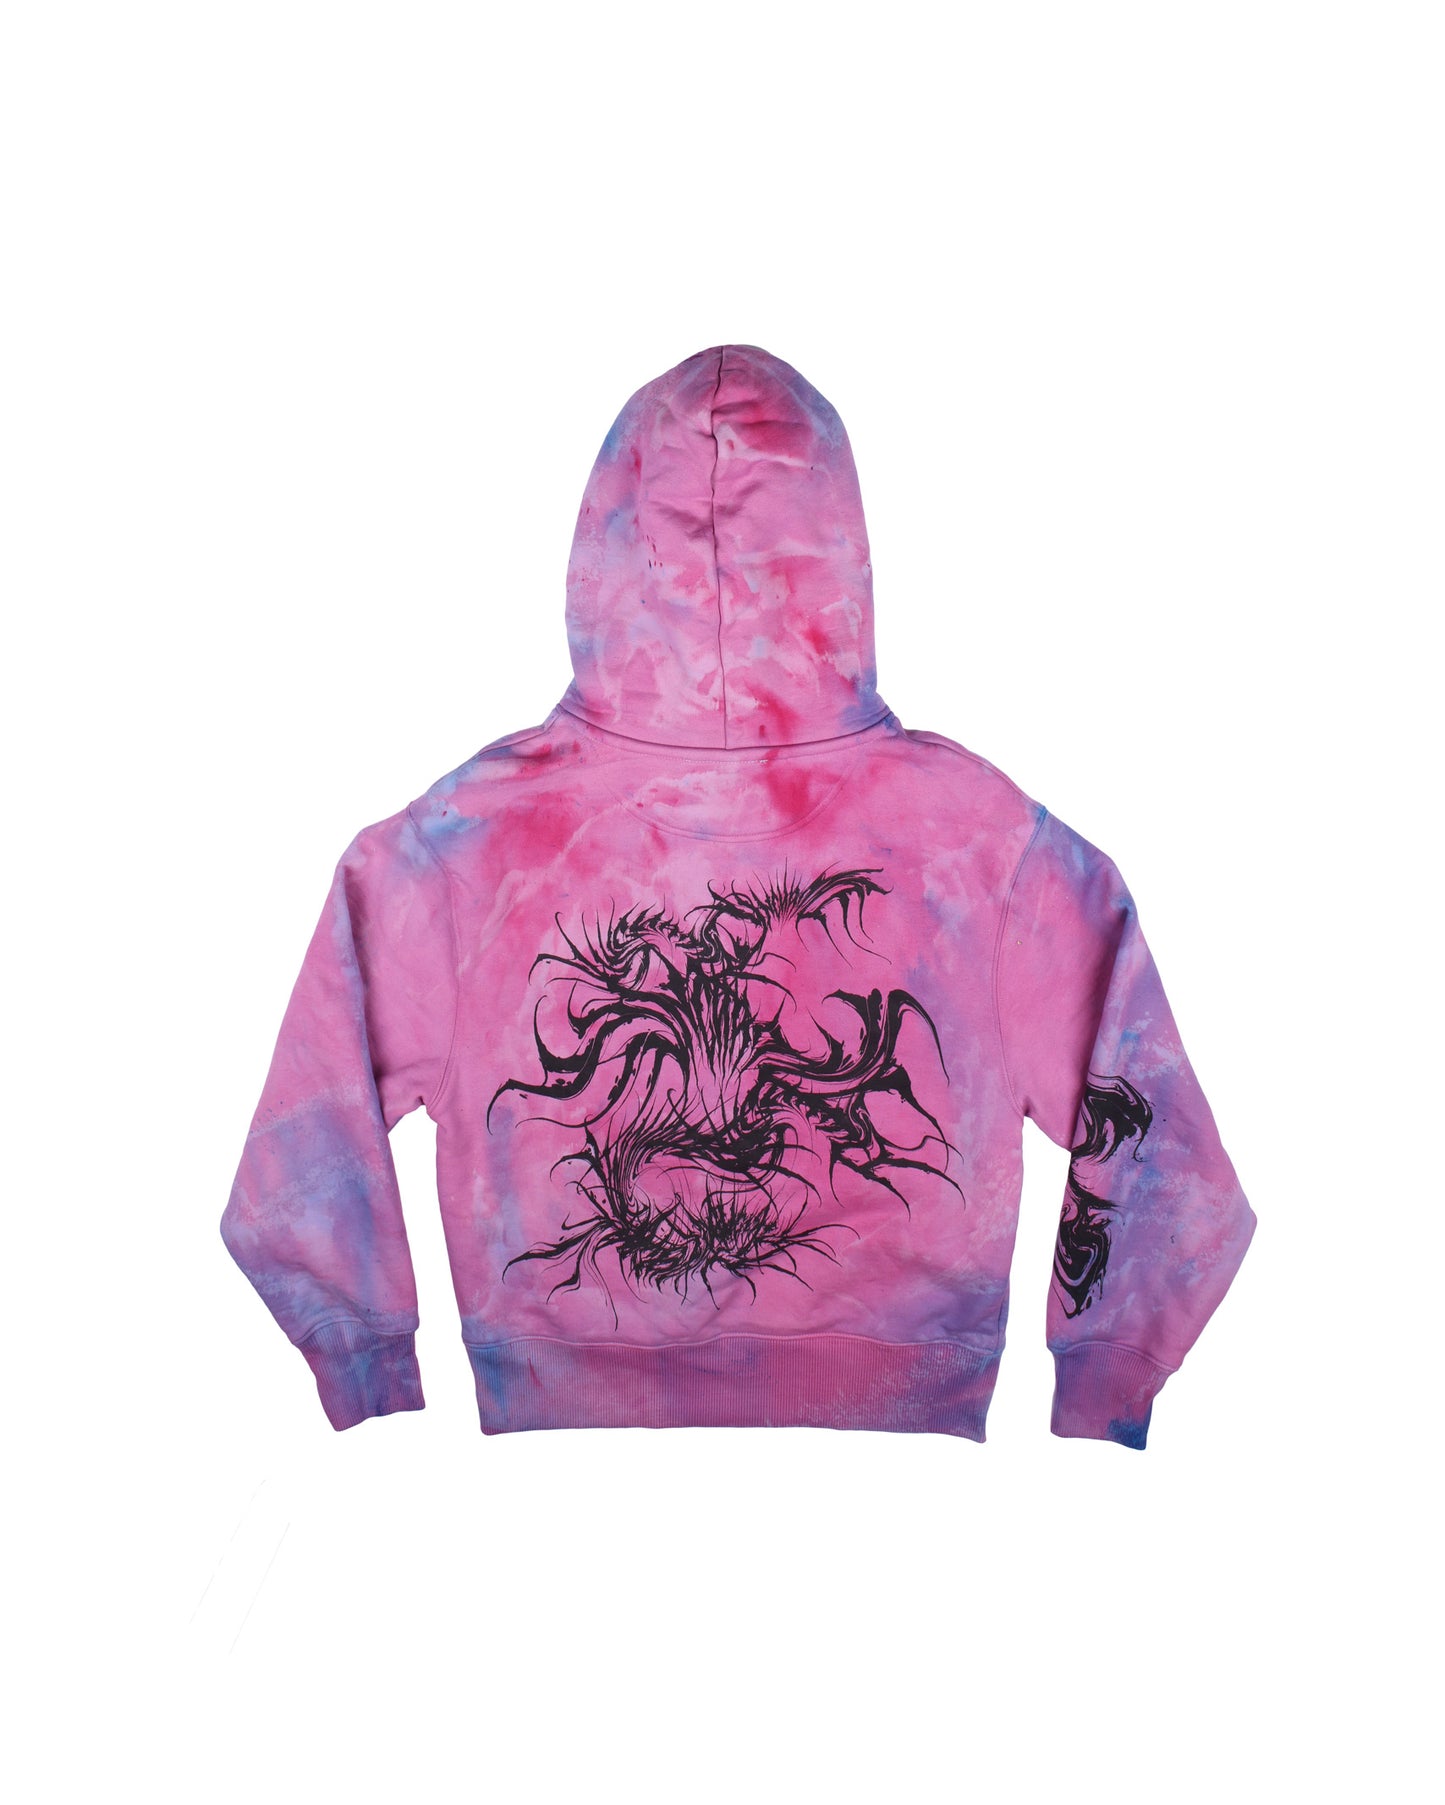 COTTON CANDY HOODIE